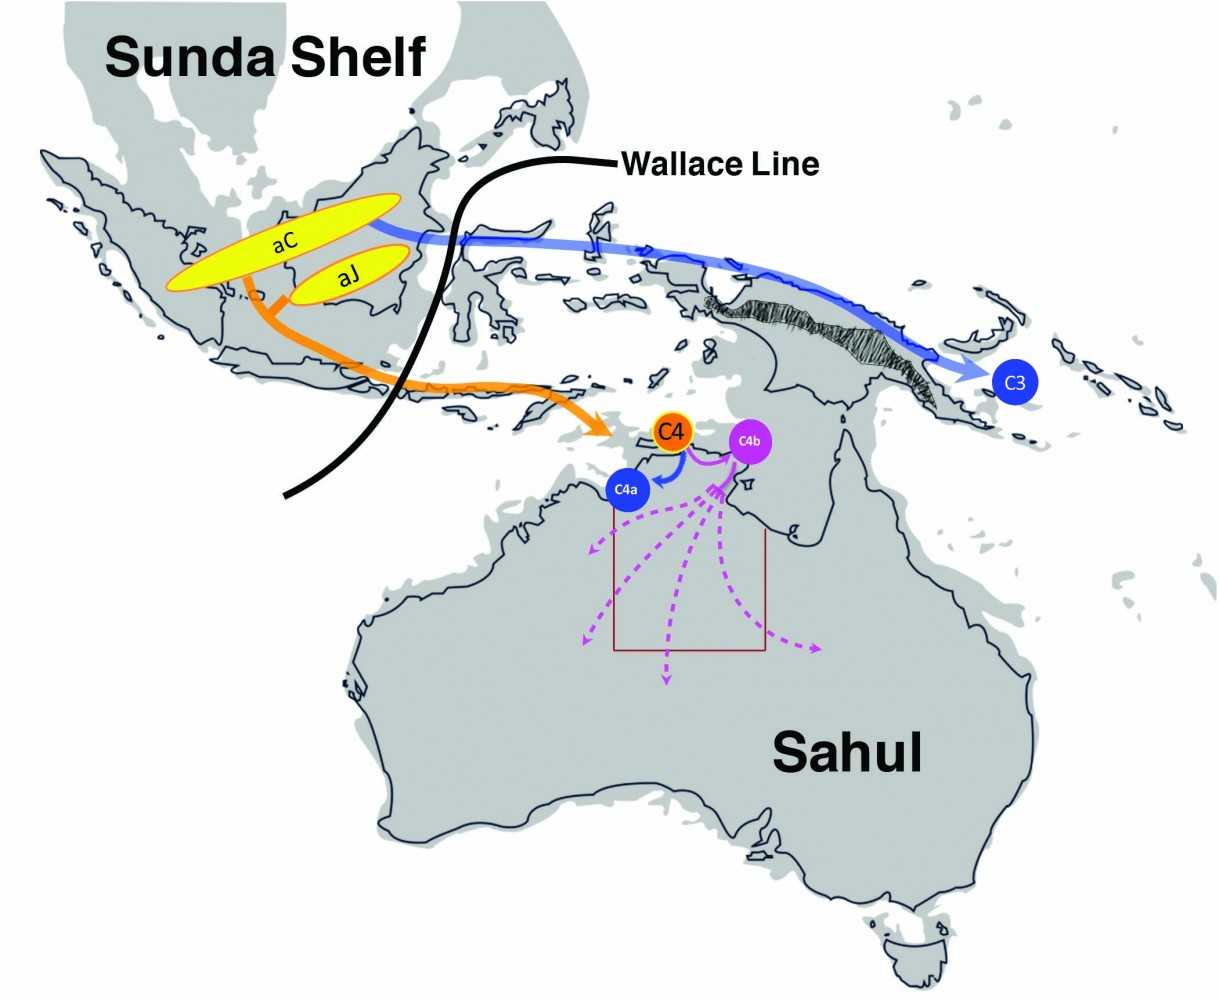 The initial migration route for HBV/C4 into the Tiwi Islands / East Arnhem (orange arrow). Credit Lilly Yuen